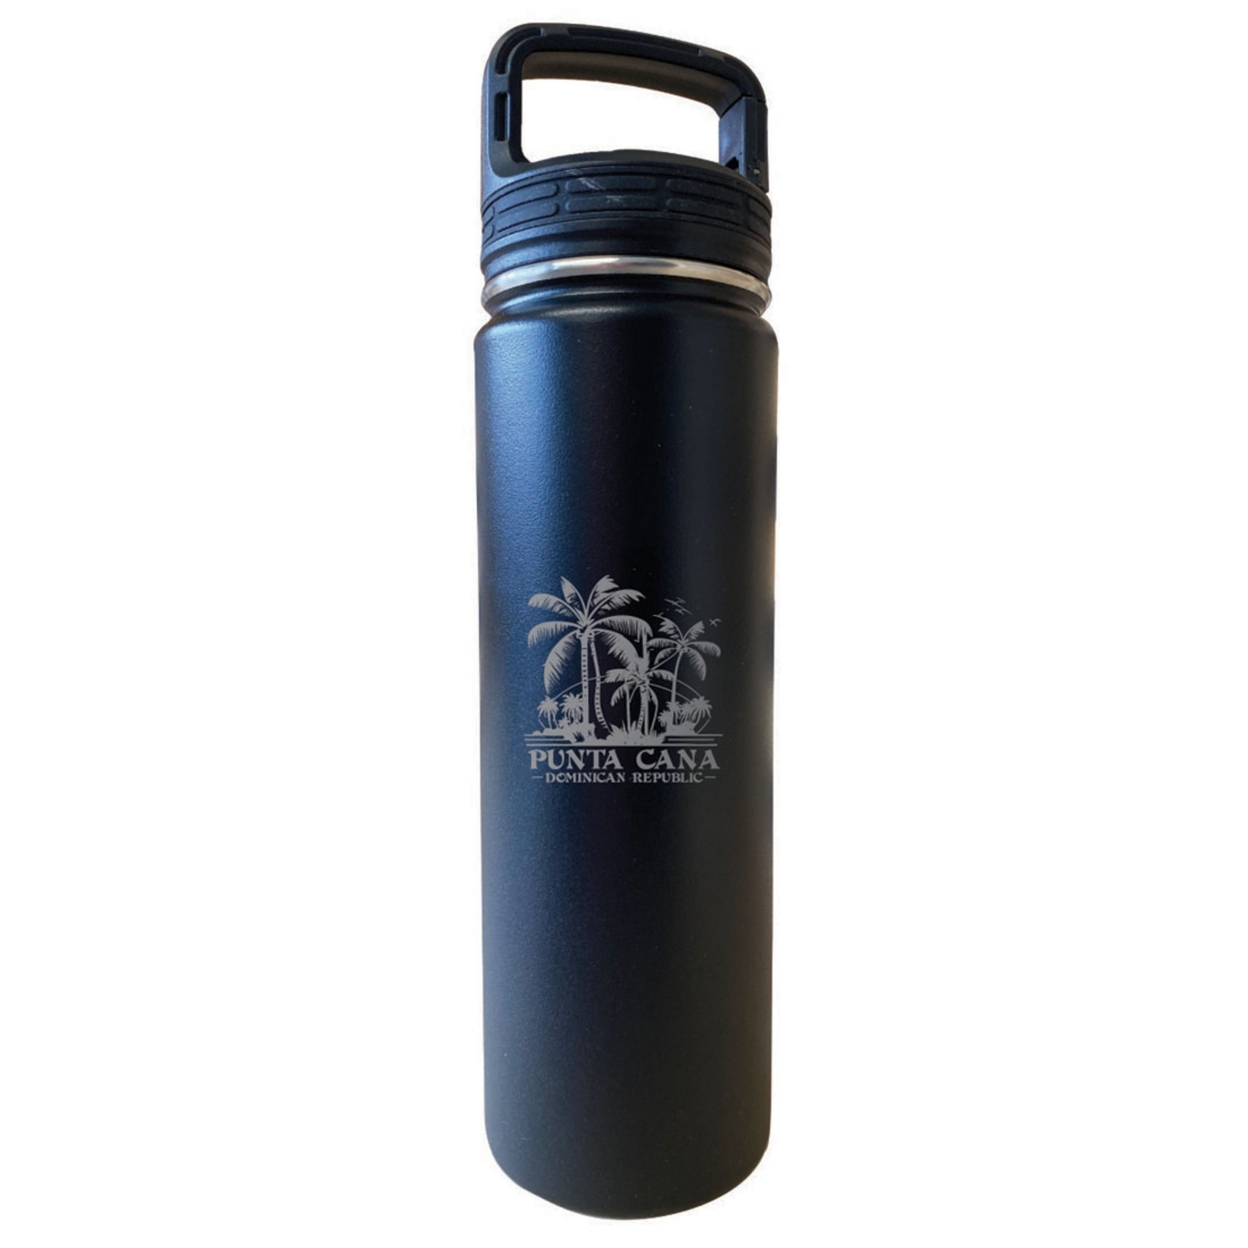 Punta Cana Dominican Republic Souvenir 32 Oz Insulated Stainless Steel Tumbler - Black, Palm